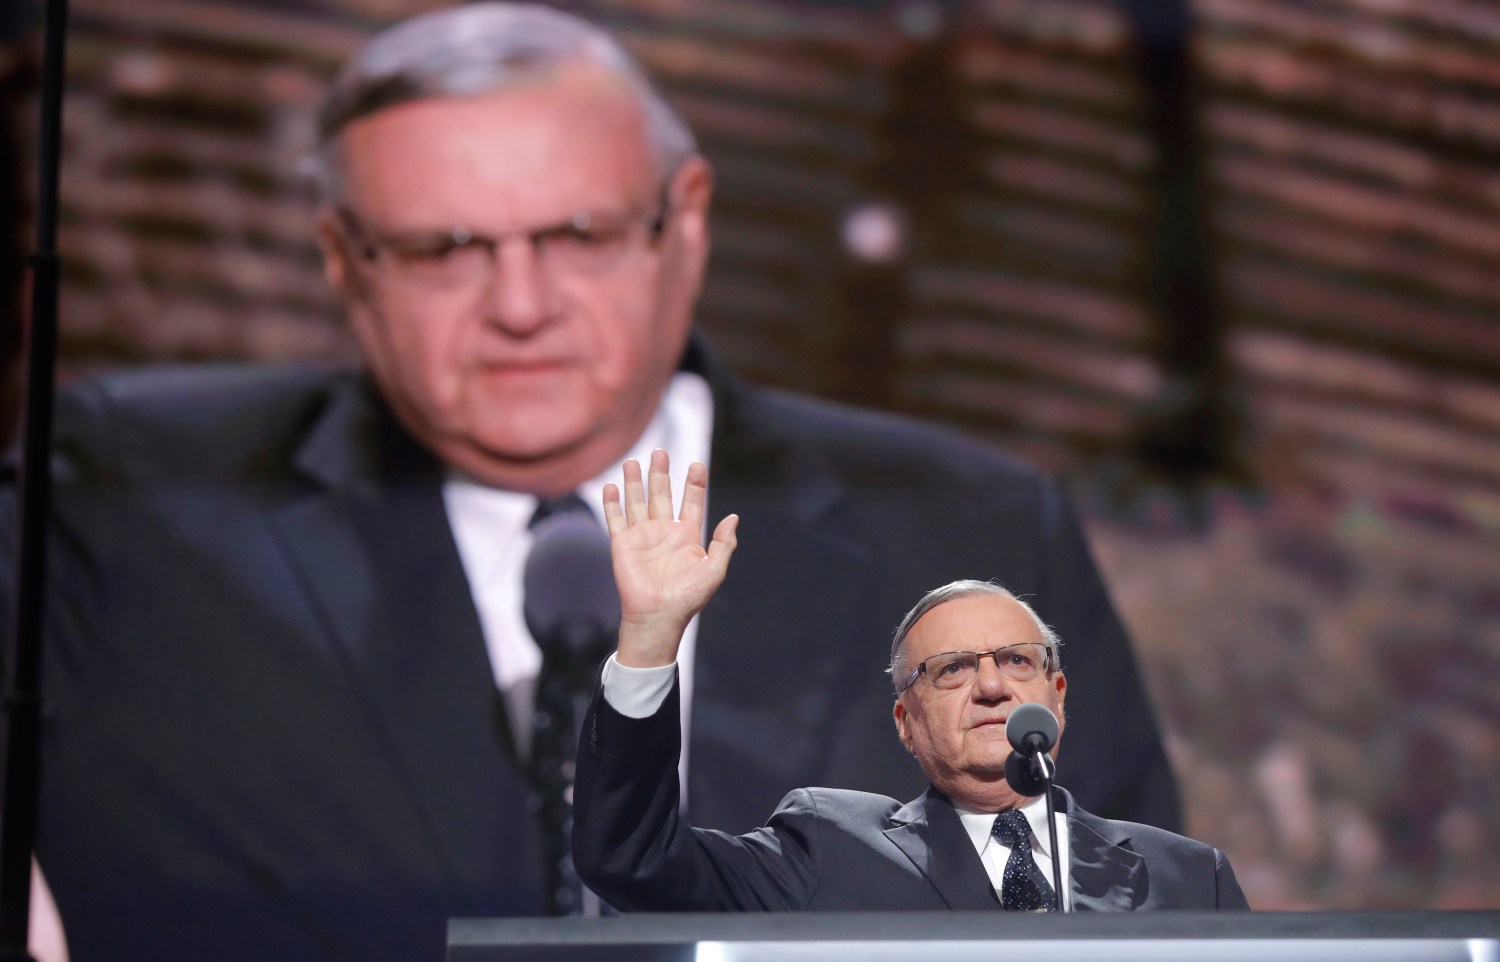 Arizona's Maricopa County Sheriff Joe Arpaio speaks at the Republican National Convention in Cleveland